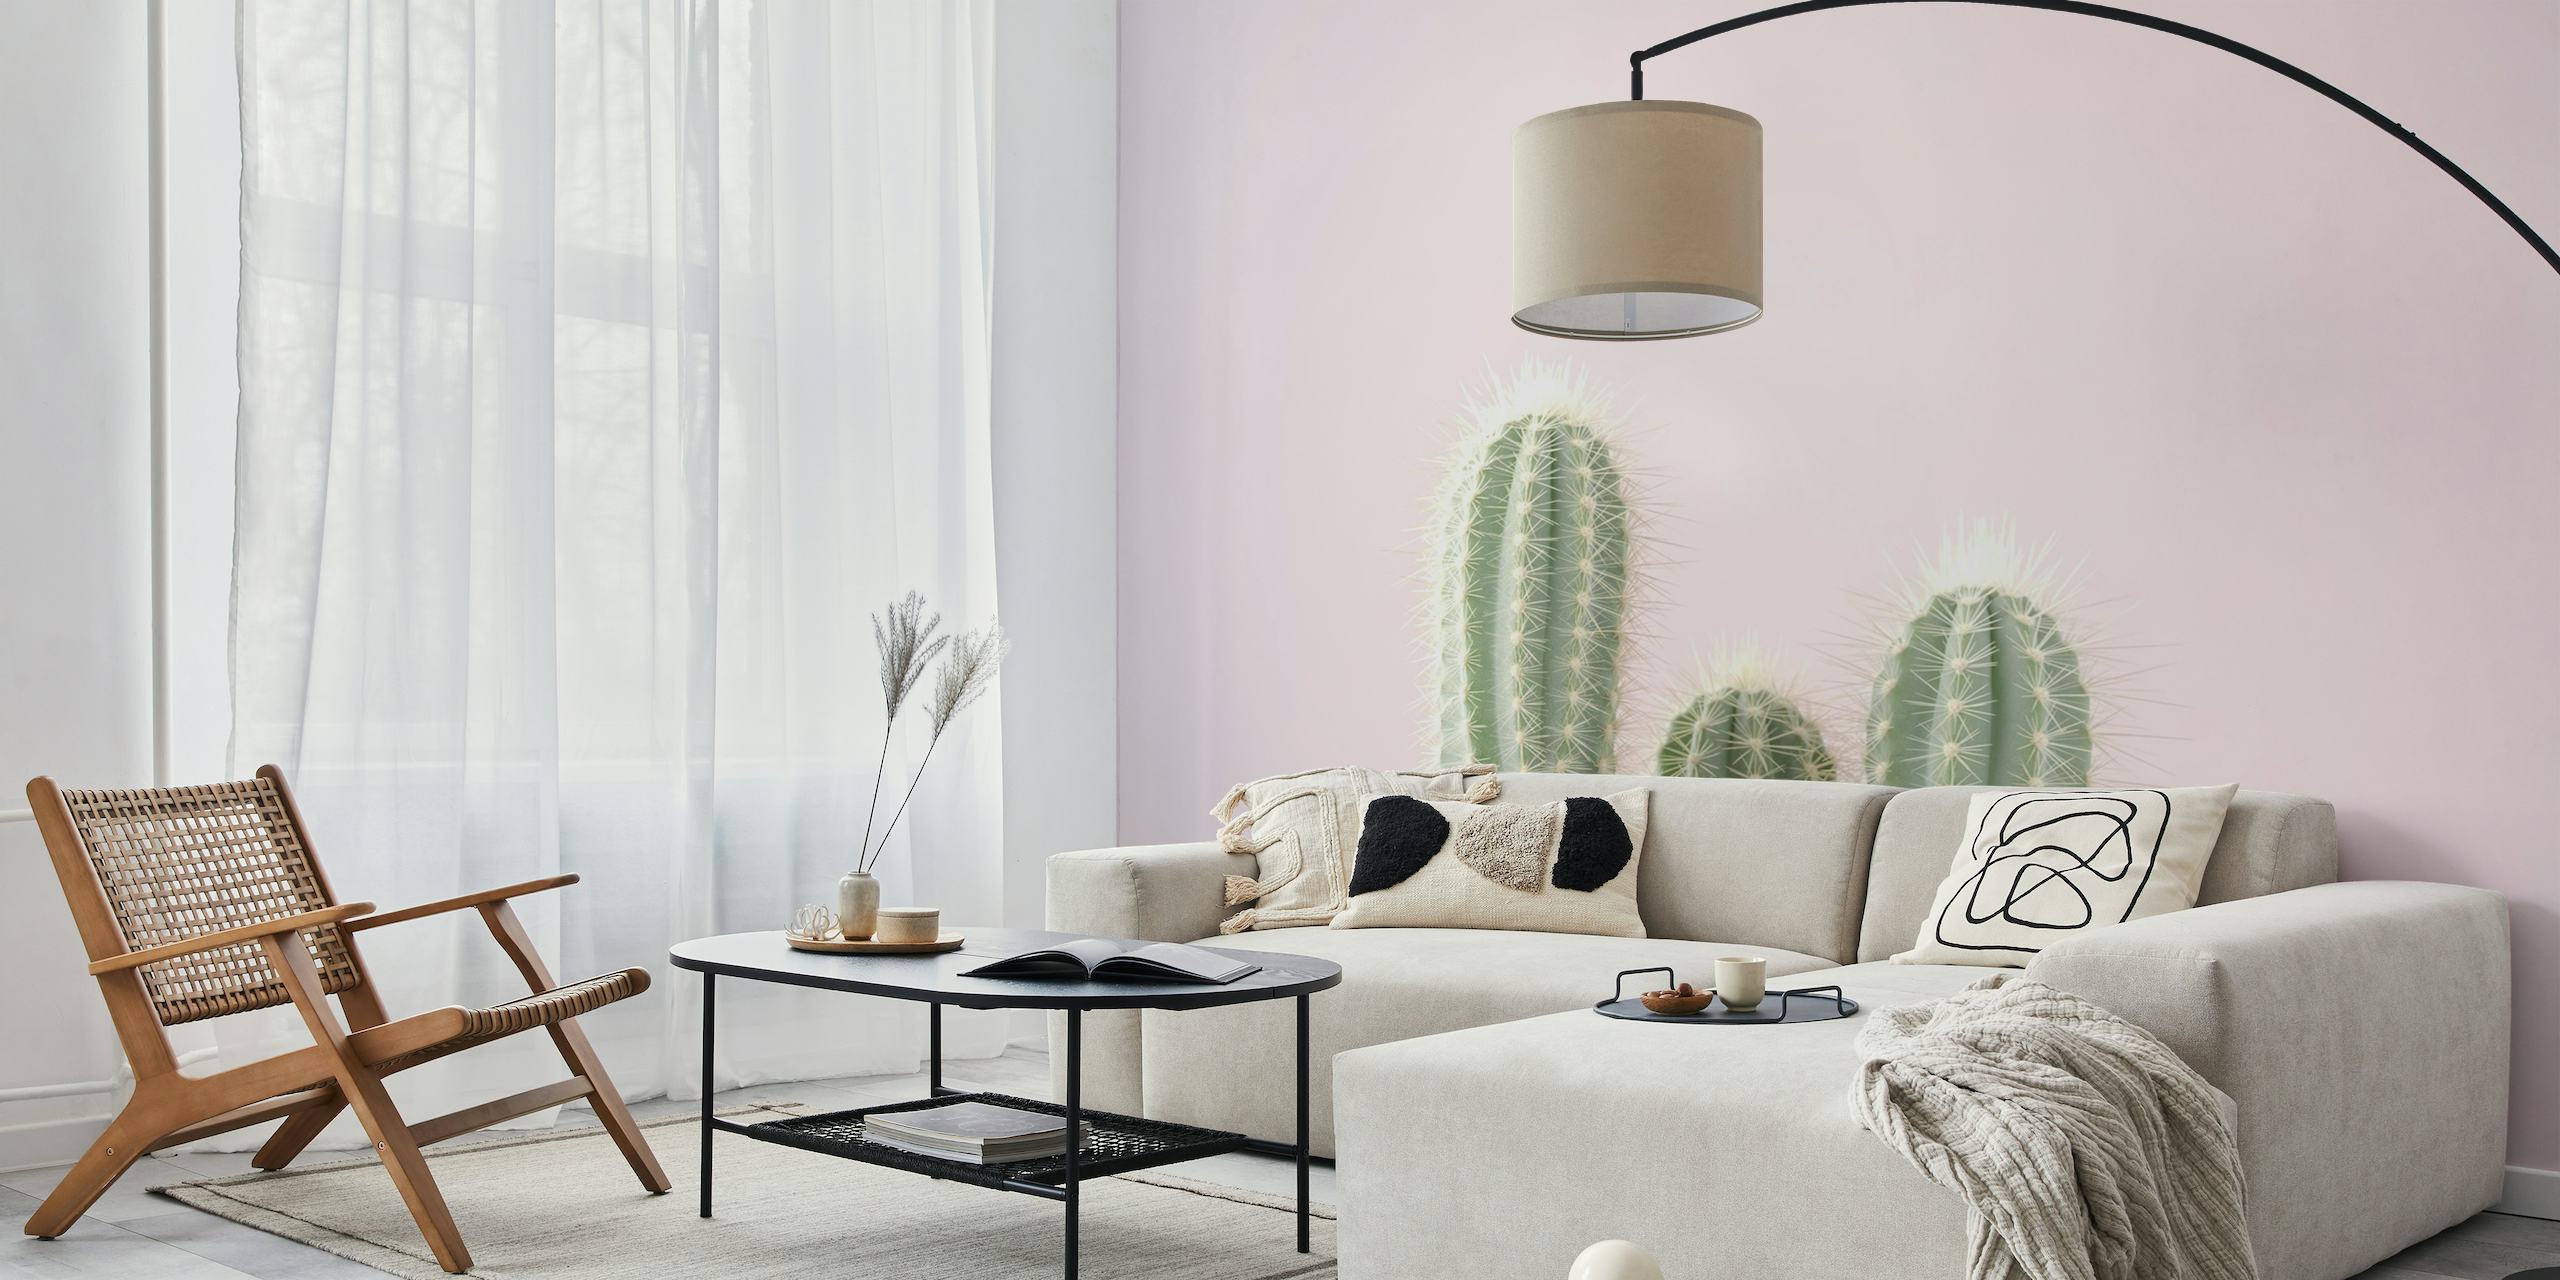 Cactus wall mural in pastel colors conveying resilience and beauty